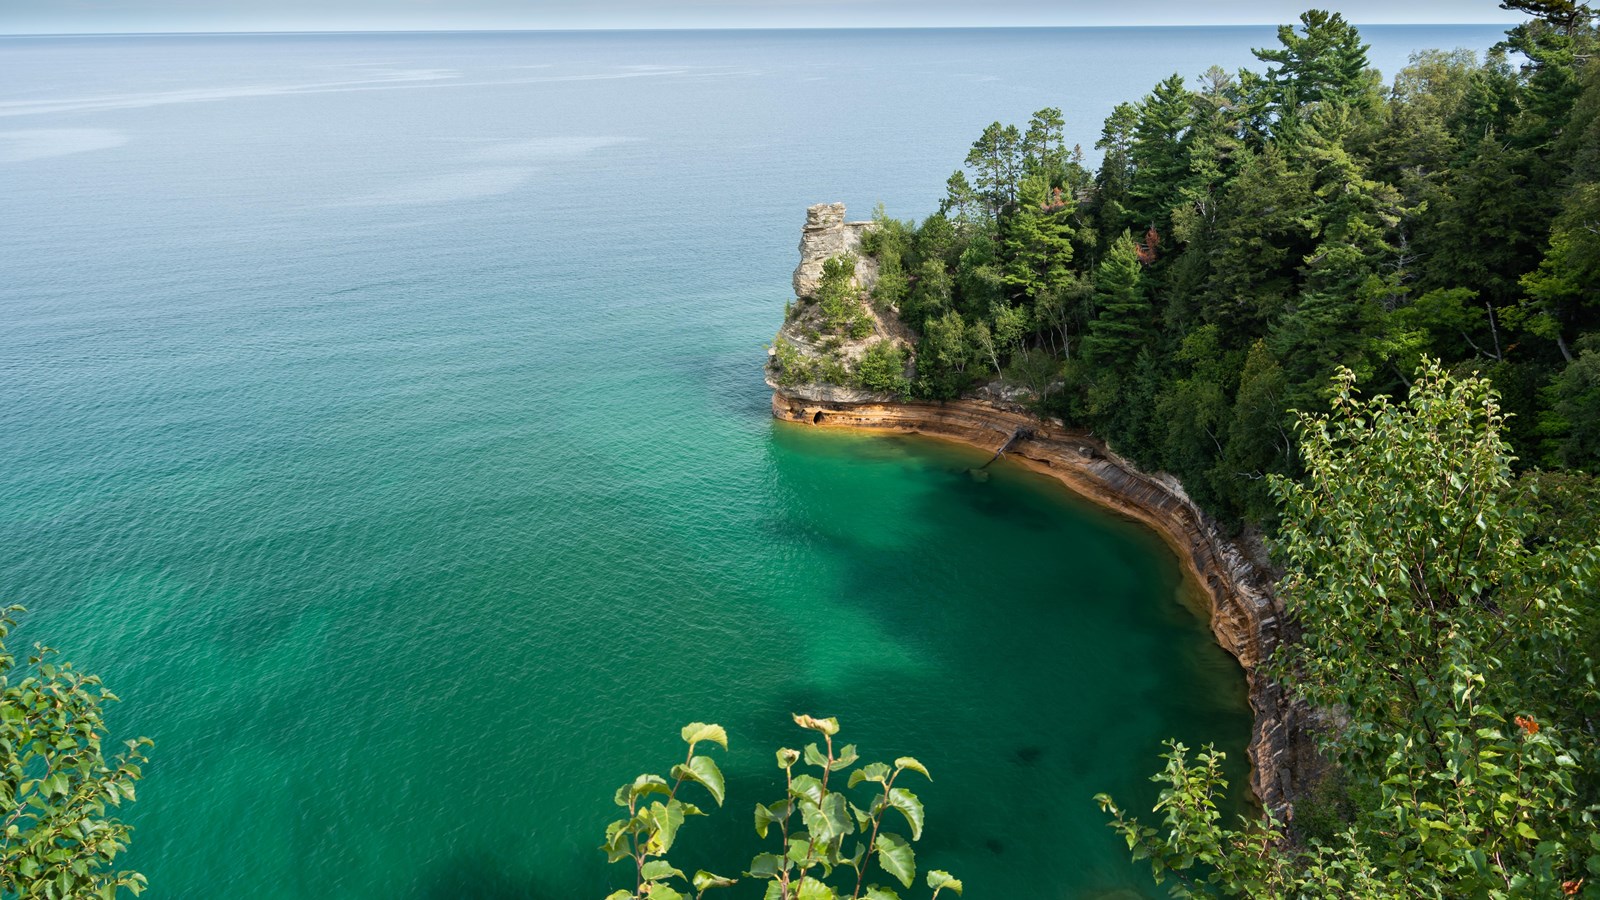 Miners Castle is a rock formation sticking out into Lake Superior